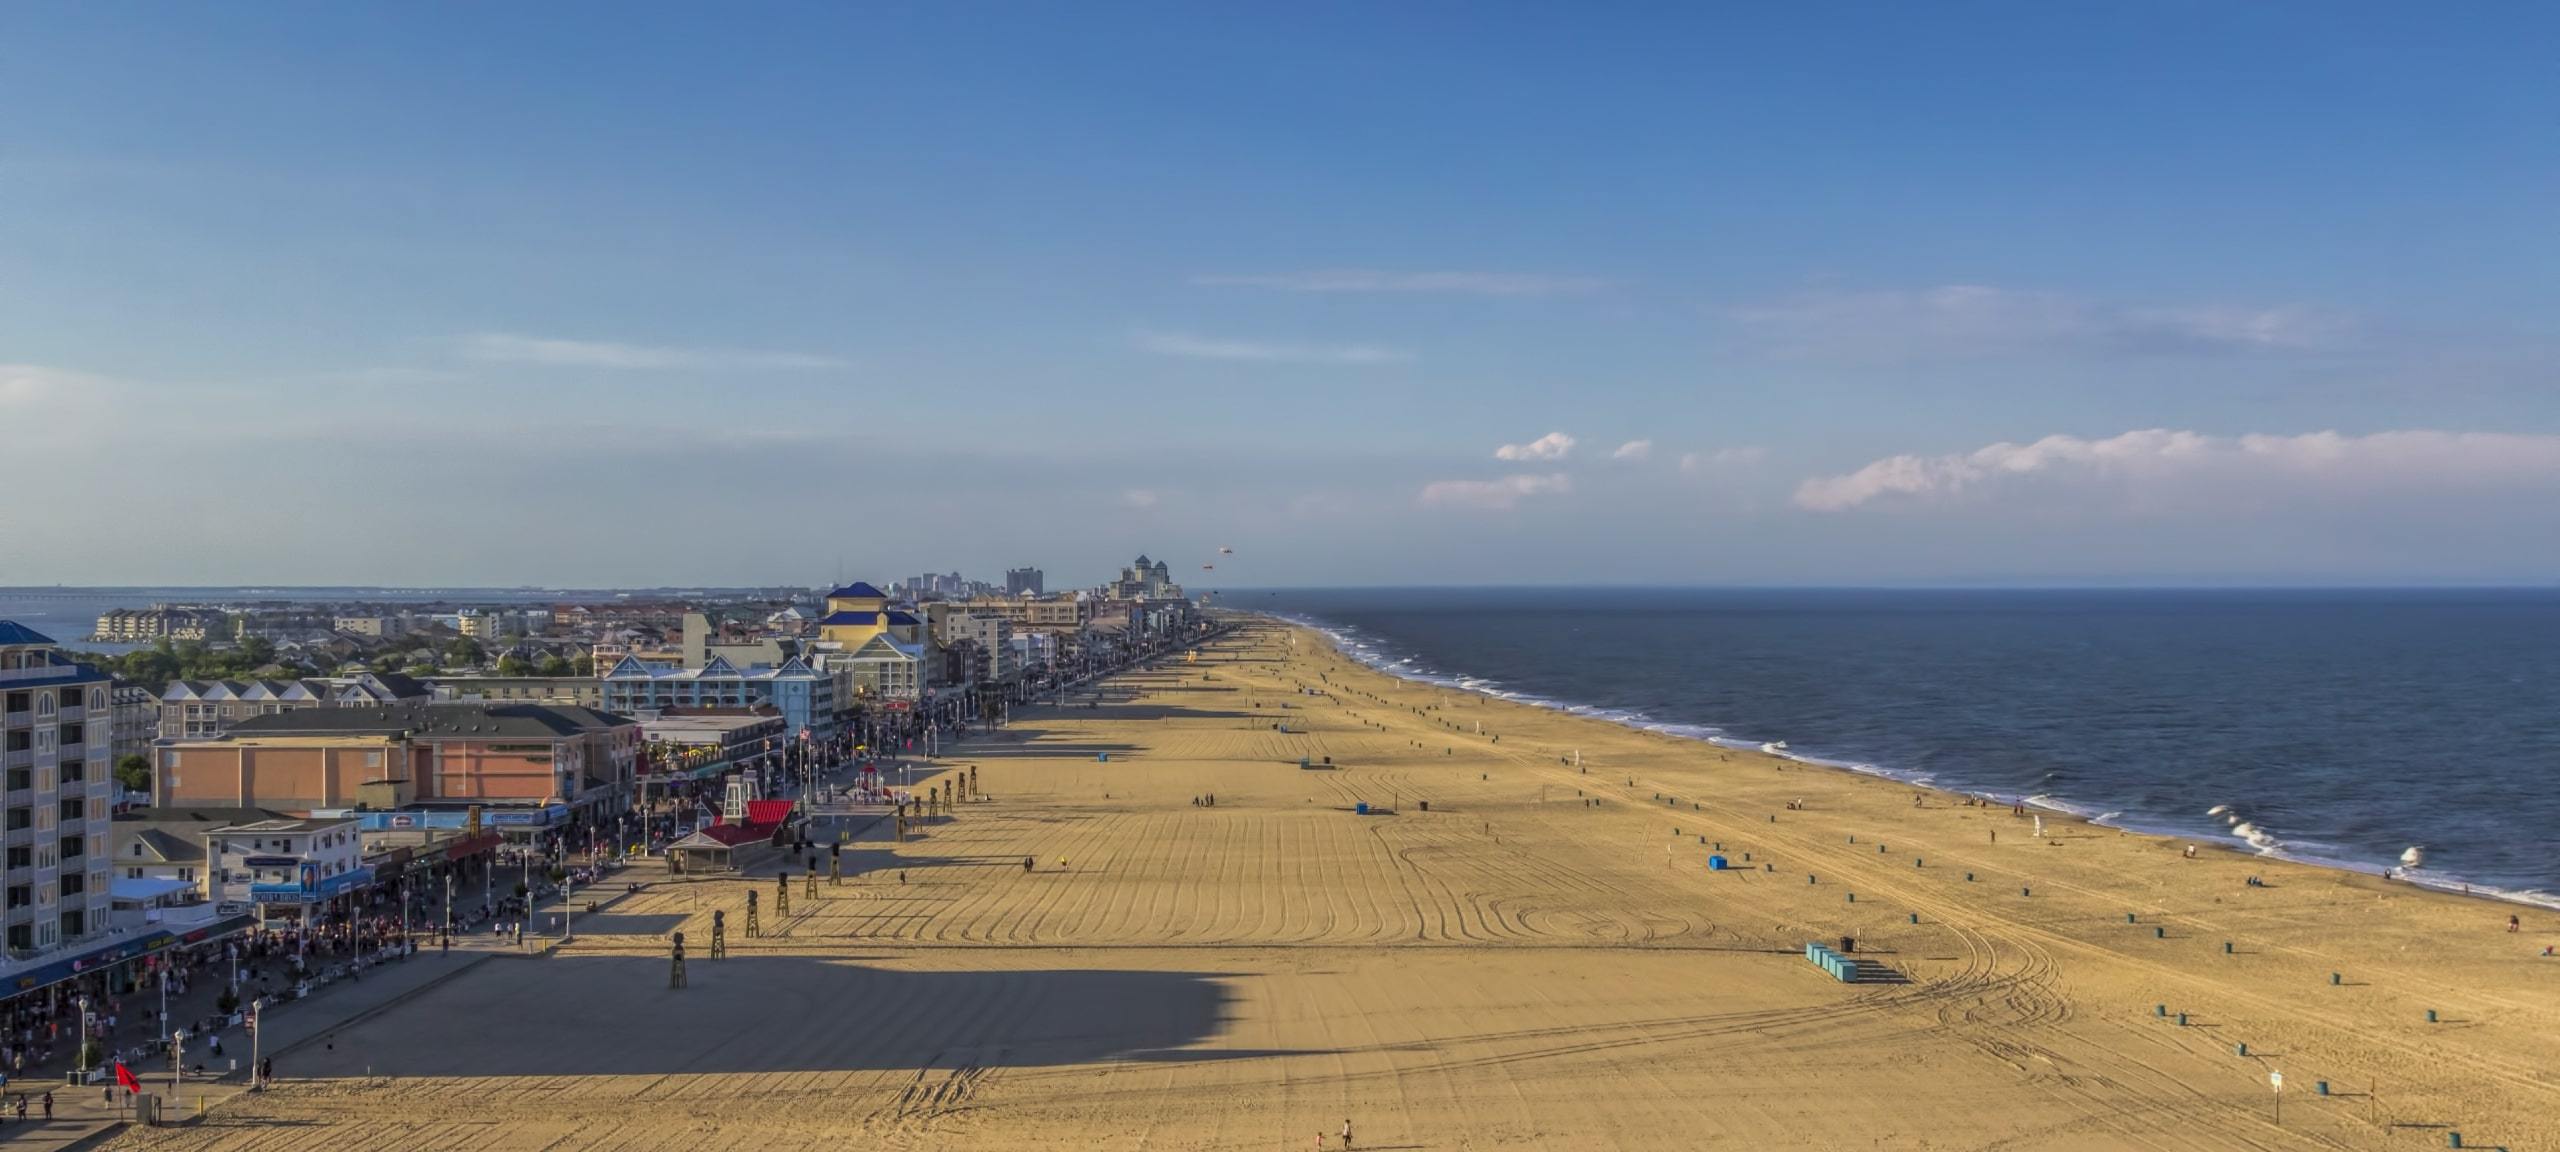 Beach and oceanfront real estate in Ocean City, Maryland